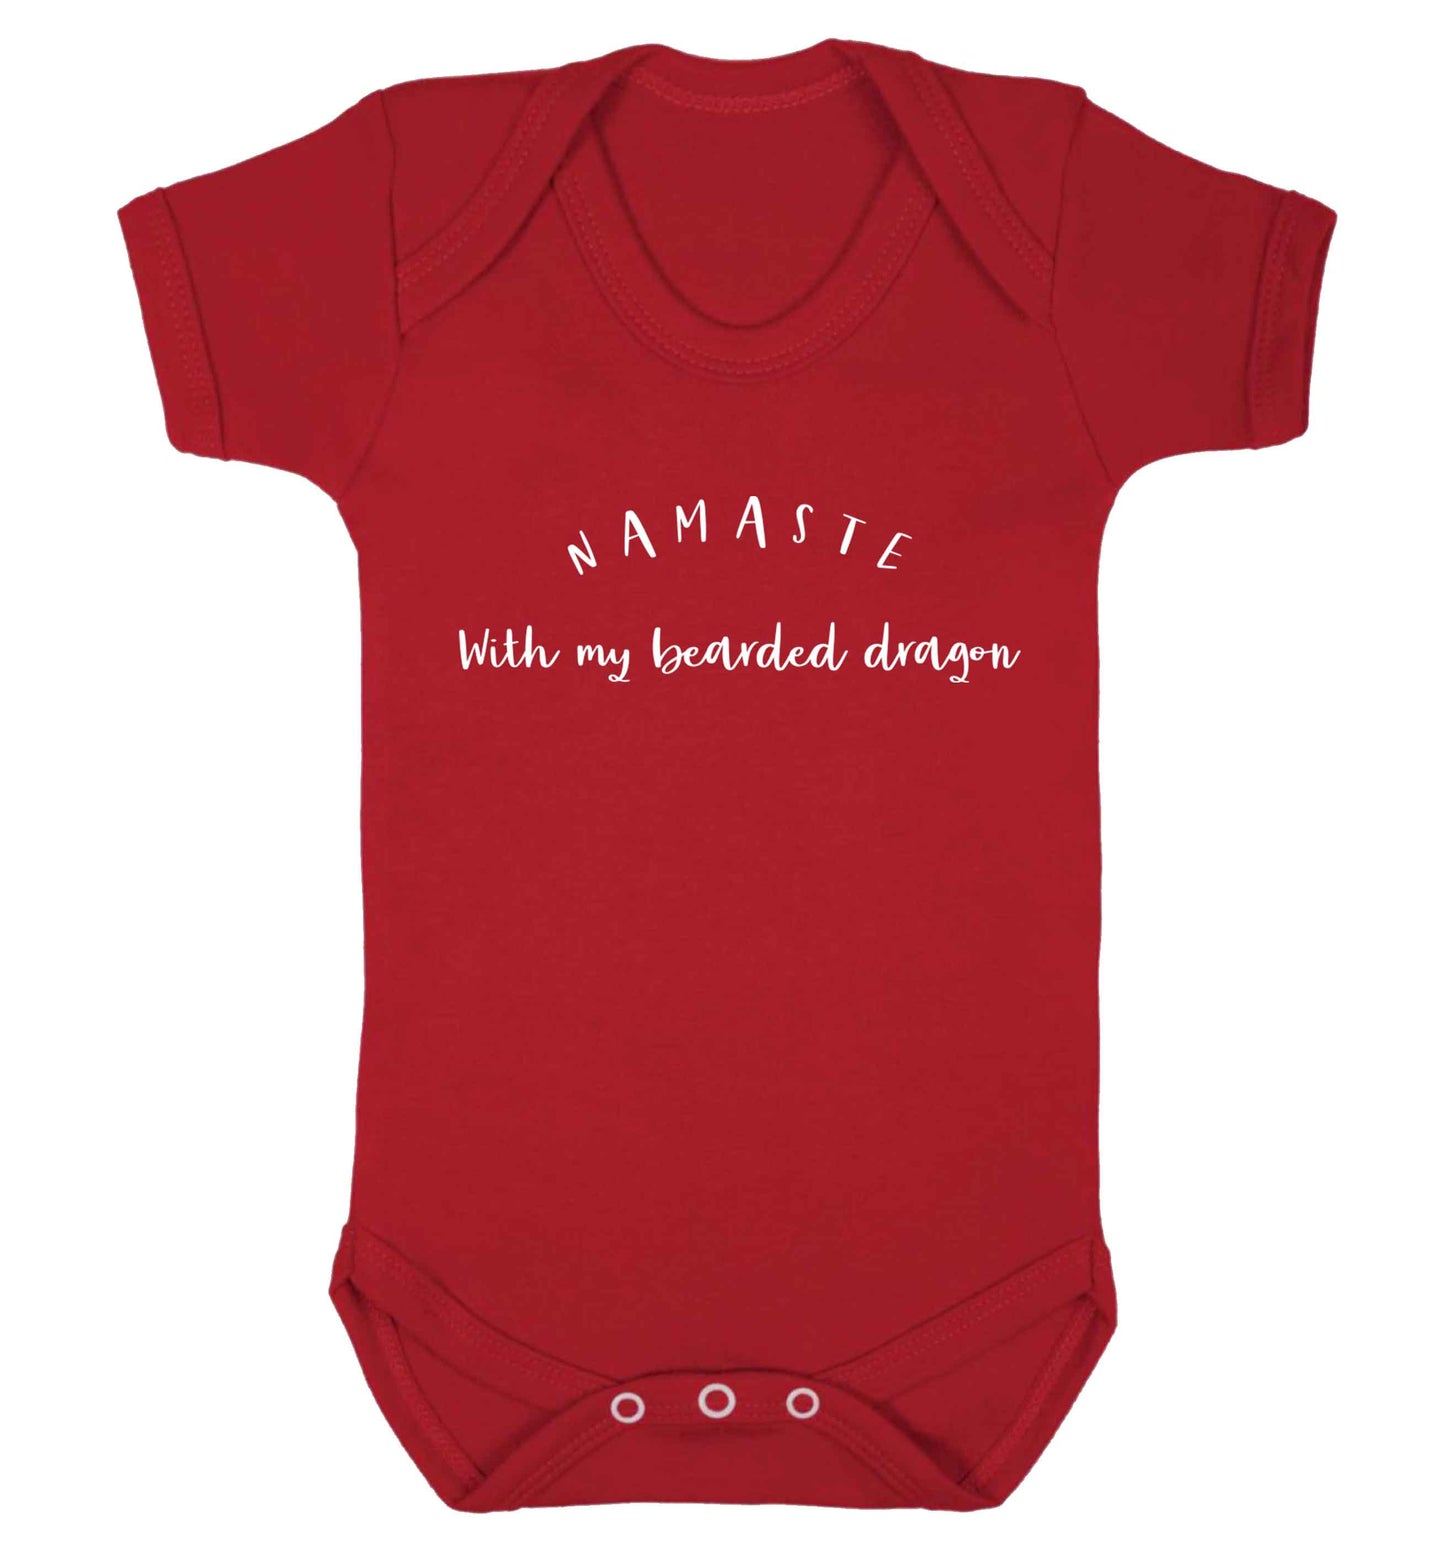 Namaste with my bearded dragon Baby Vest red 18-24 months